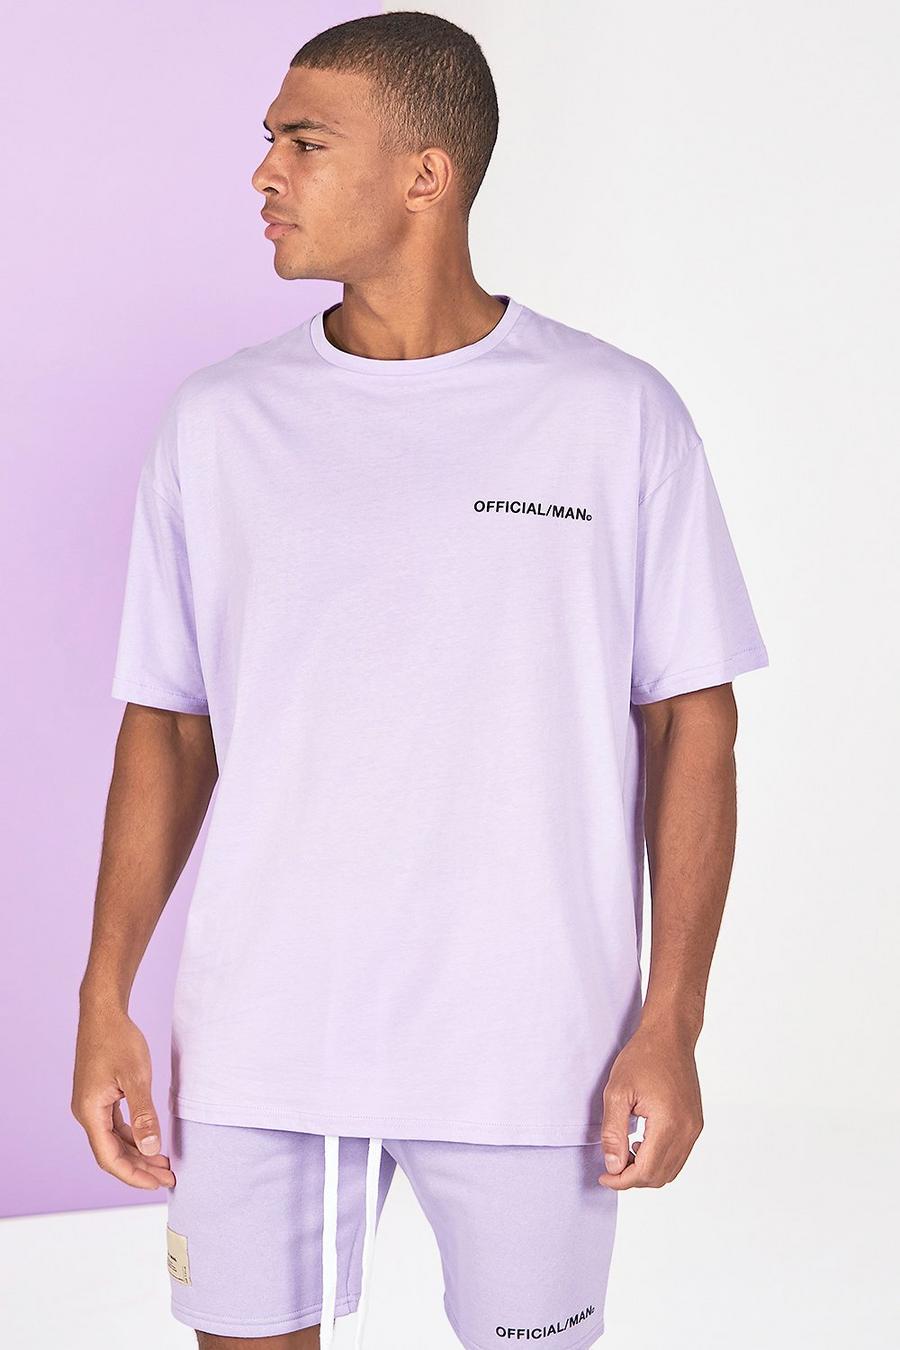 Lilac grey Oversized Official Man Front Print T-Shirt image number 1